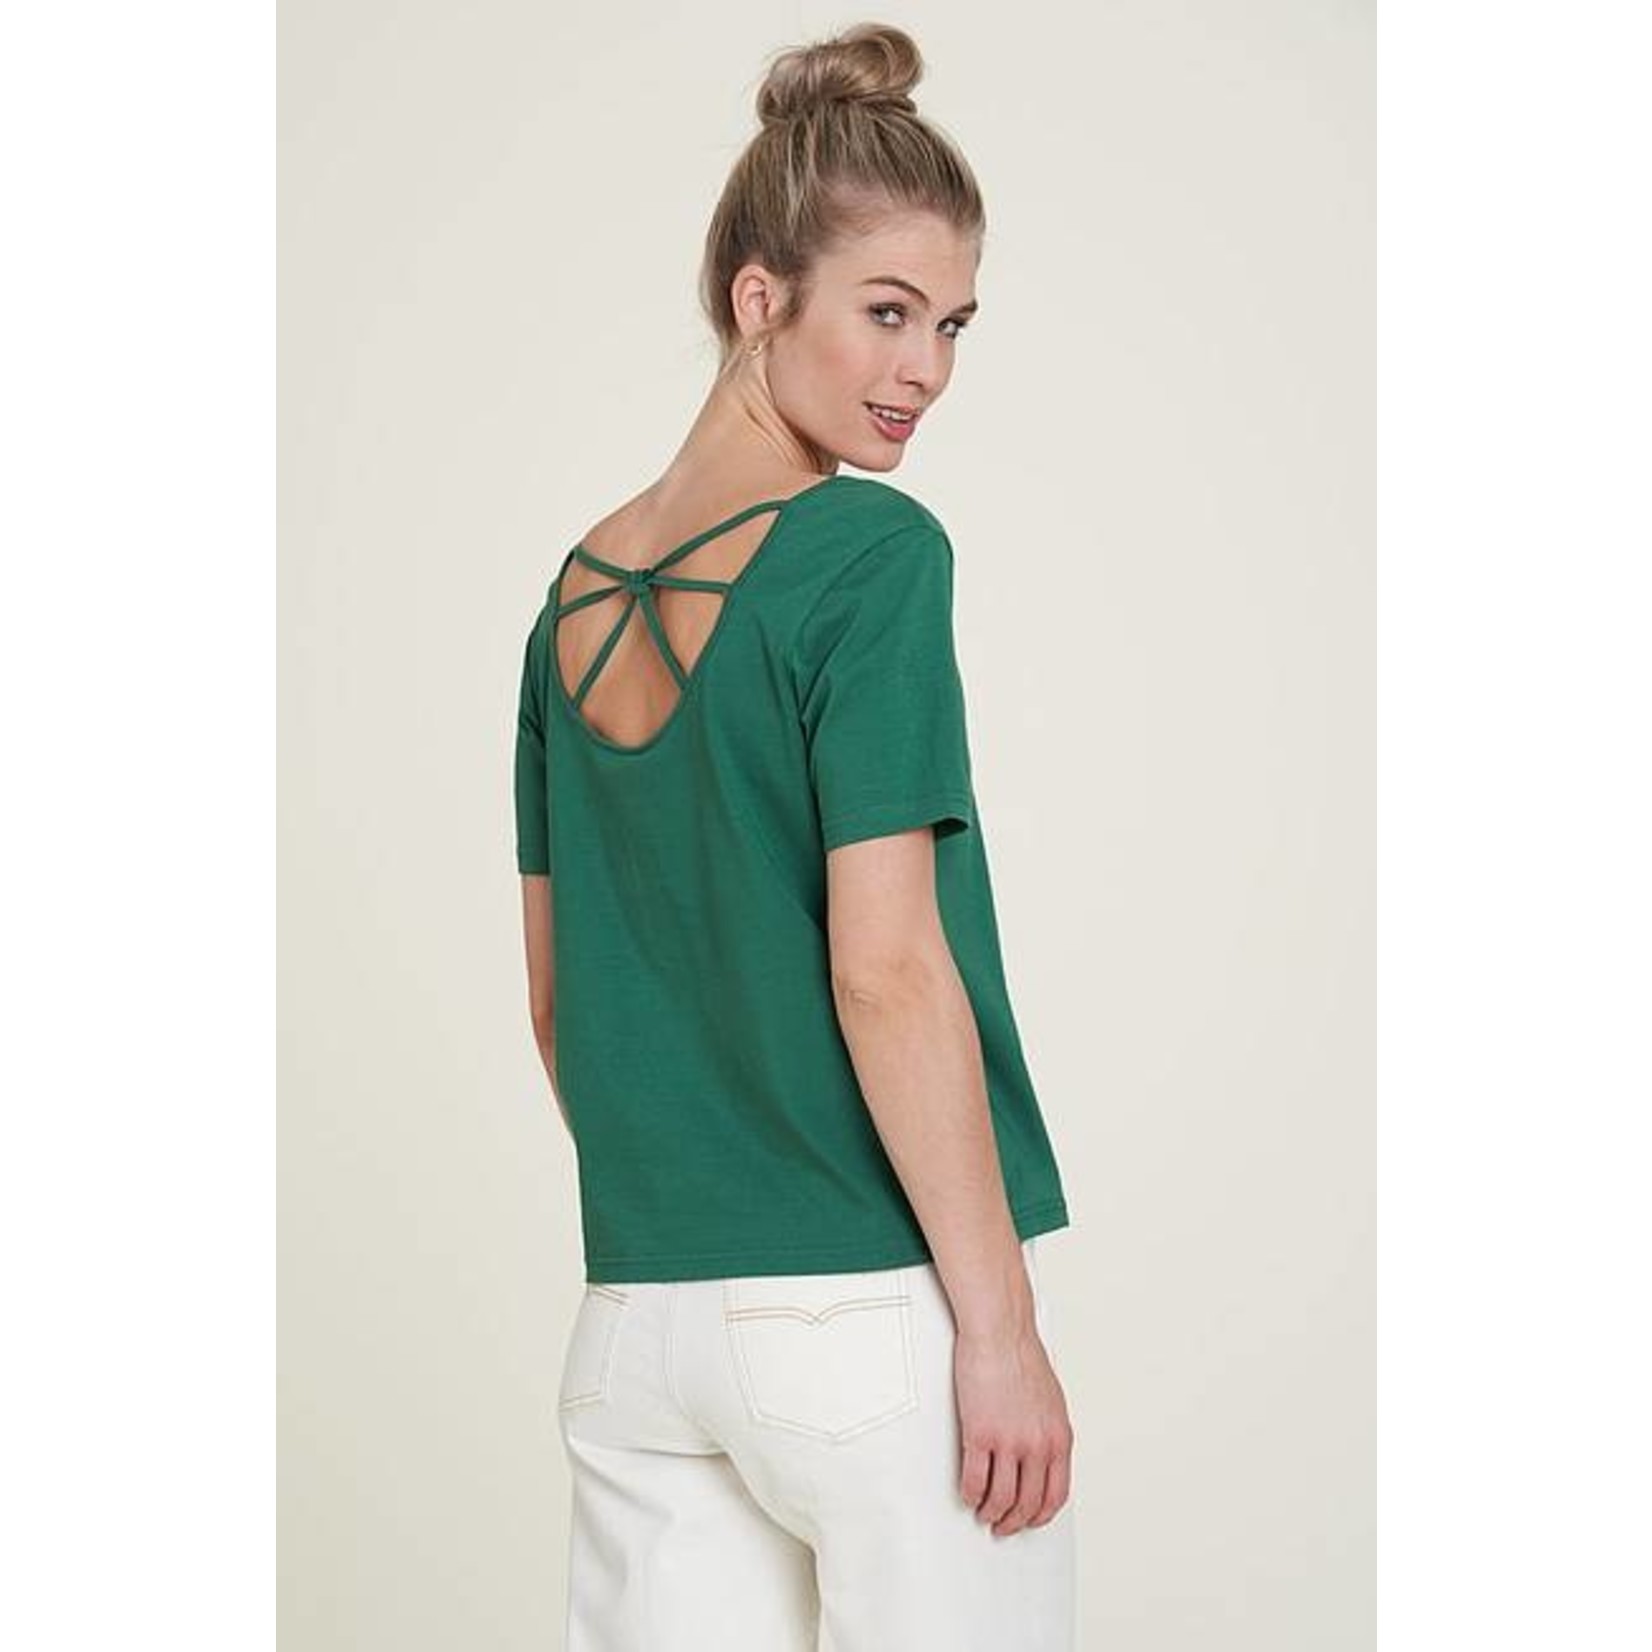 Tranquillo Shirt with Back Details